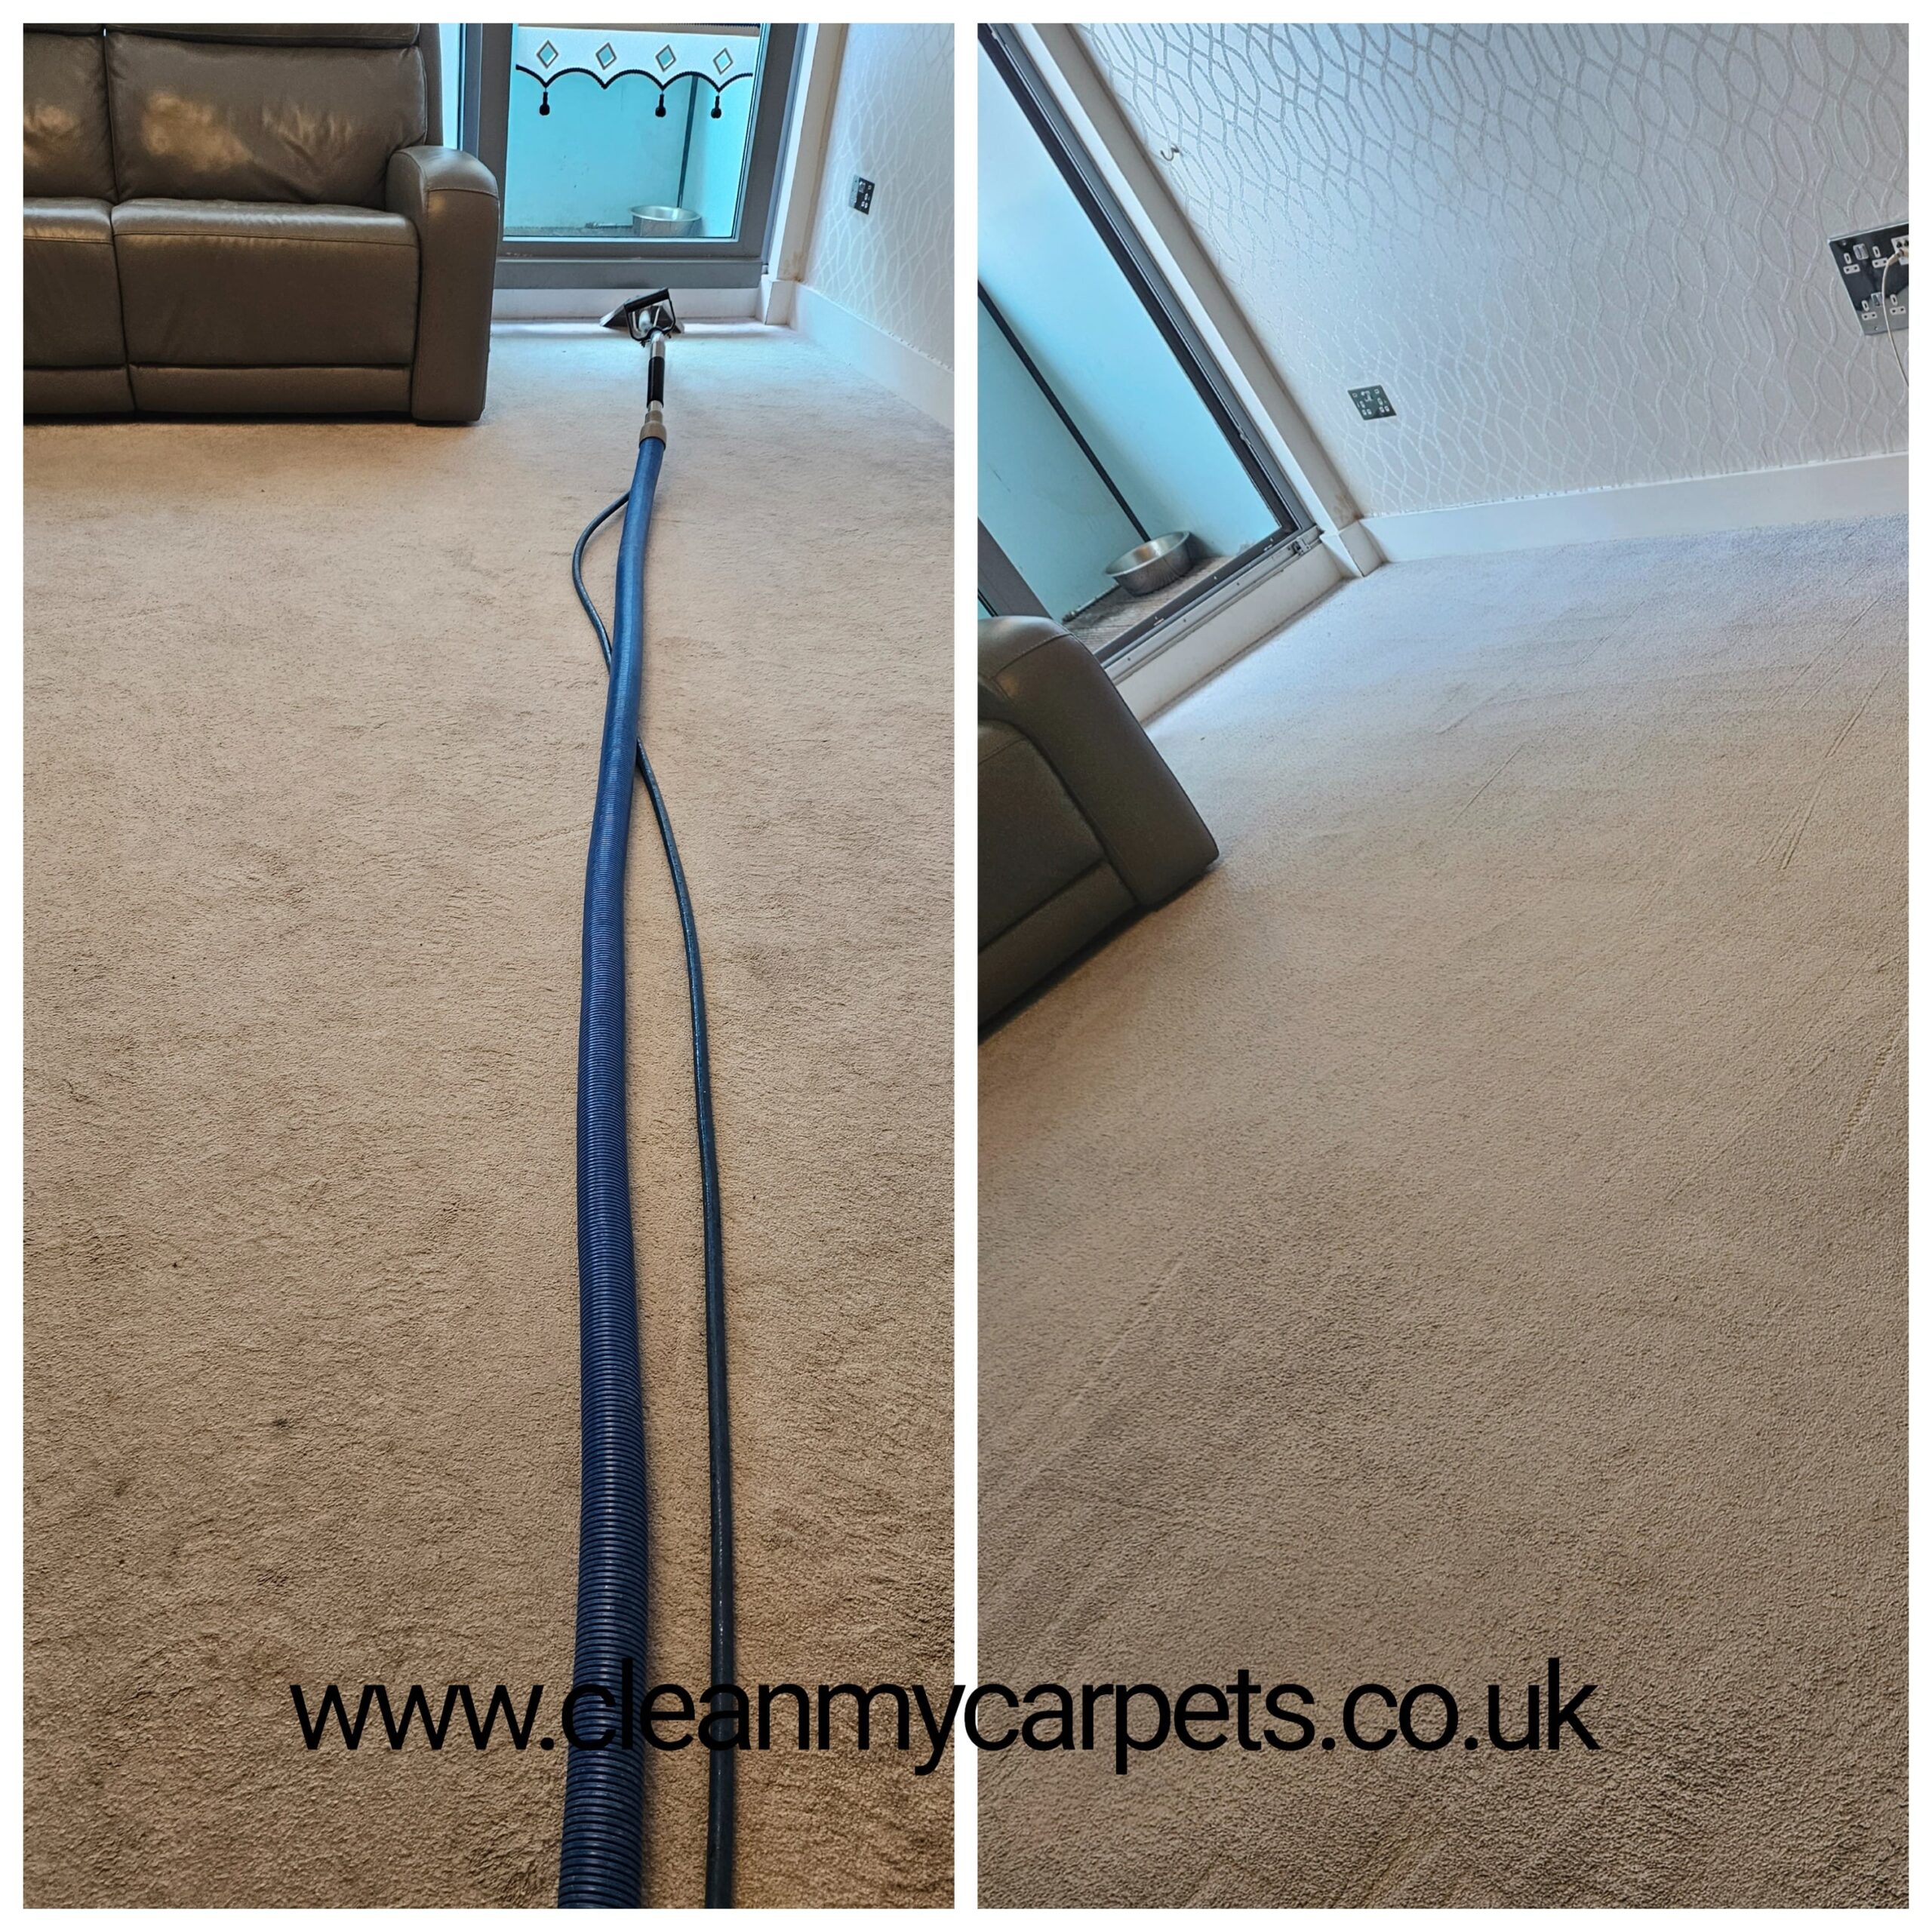 Carpet Cleaning Service Liverpool